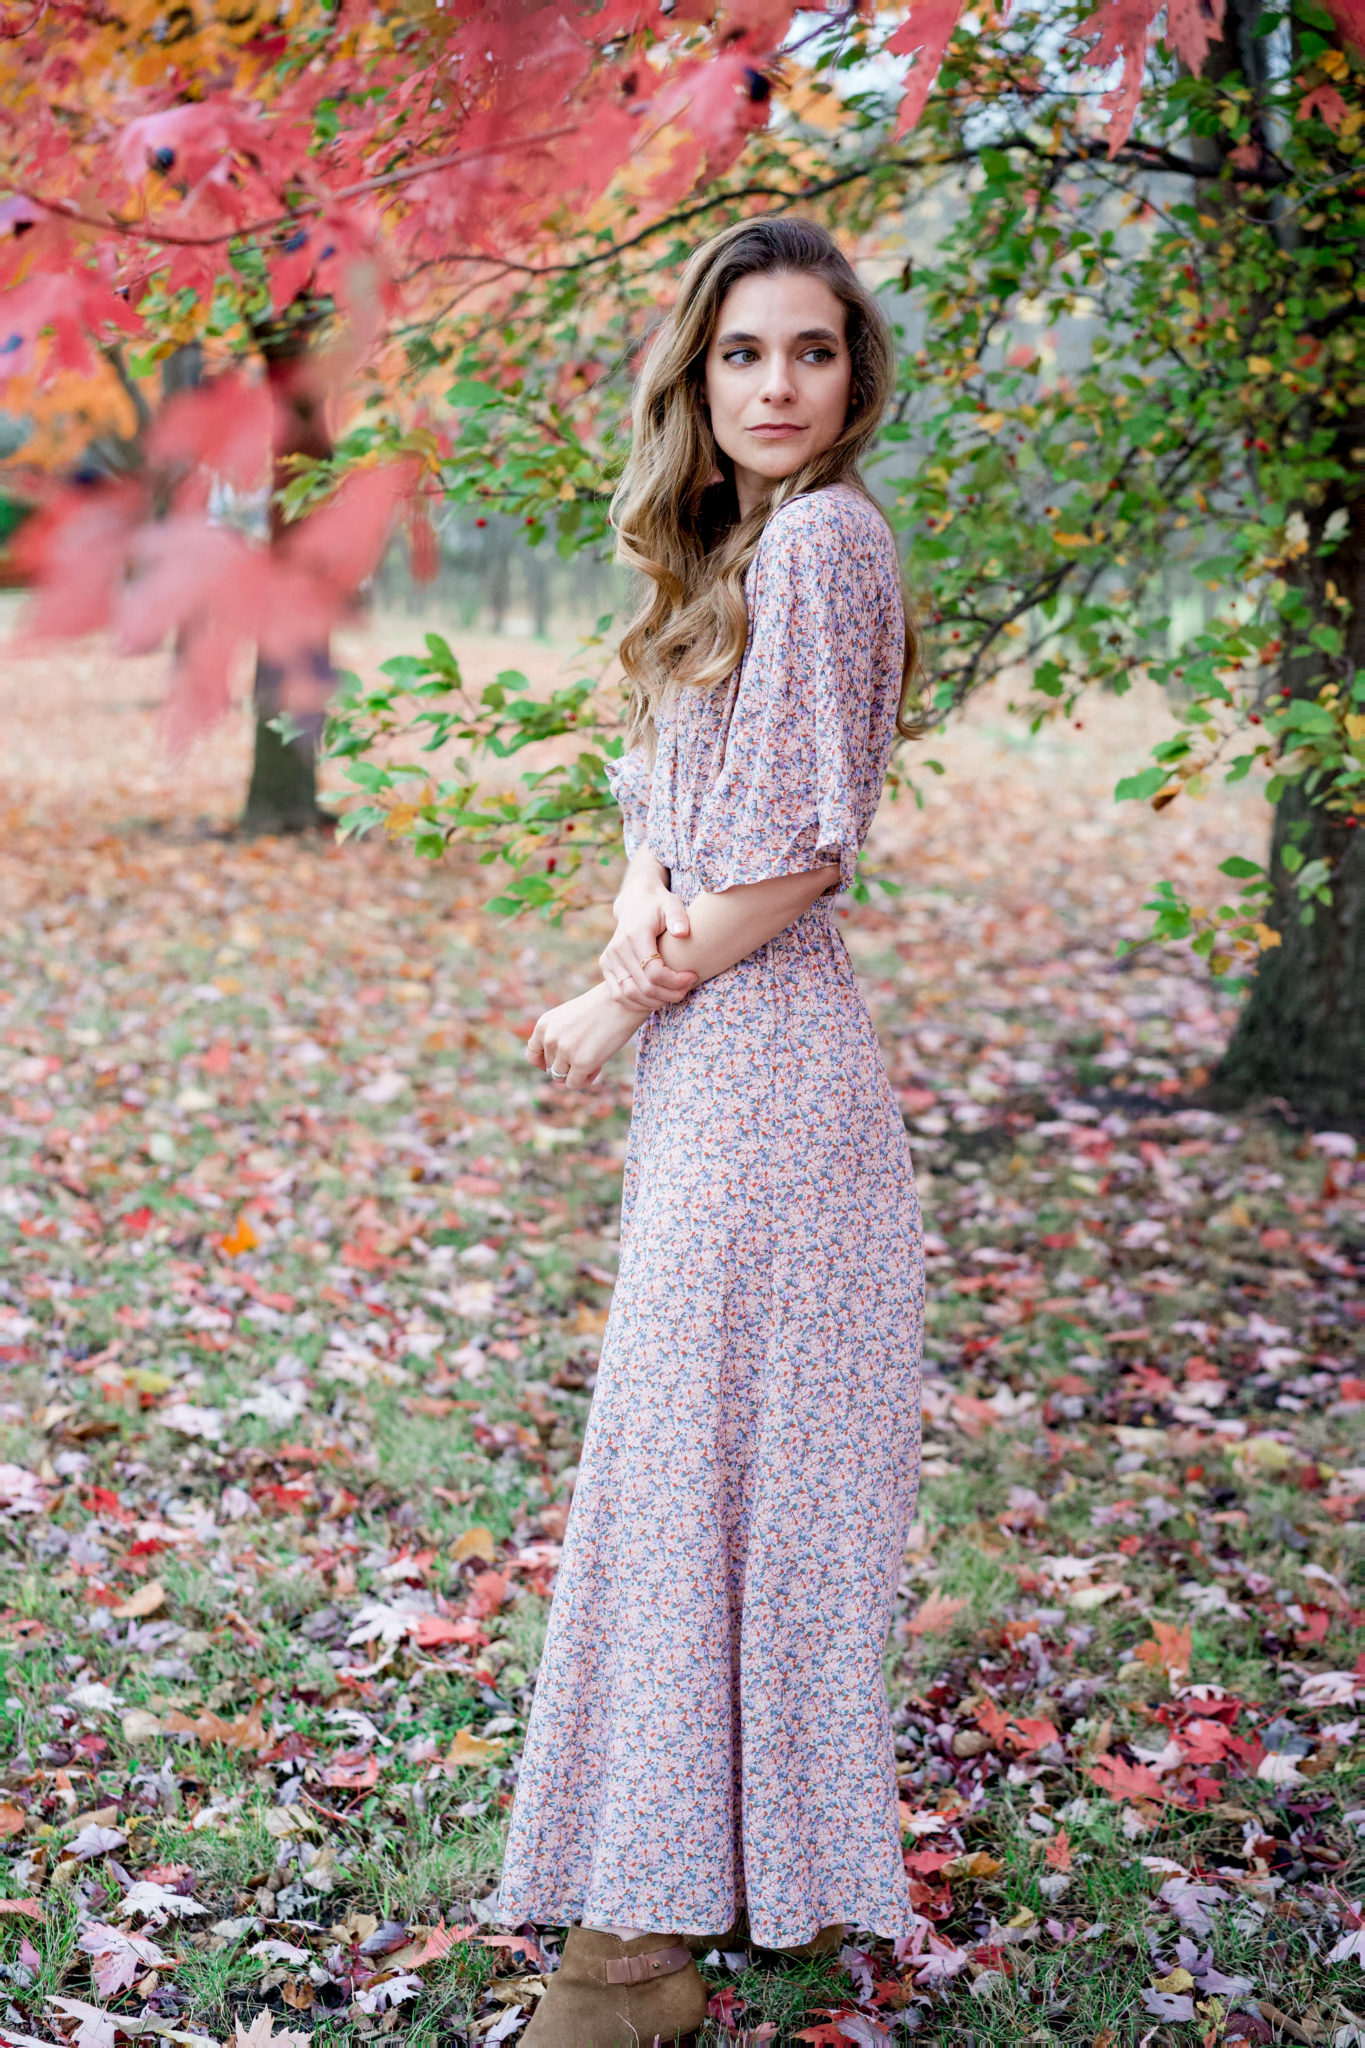 How To Wear A Maxi Dress In The Fall The Dark Plum